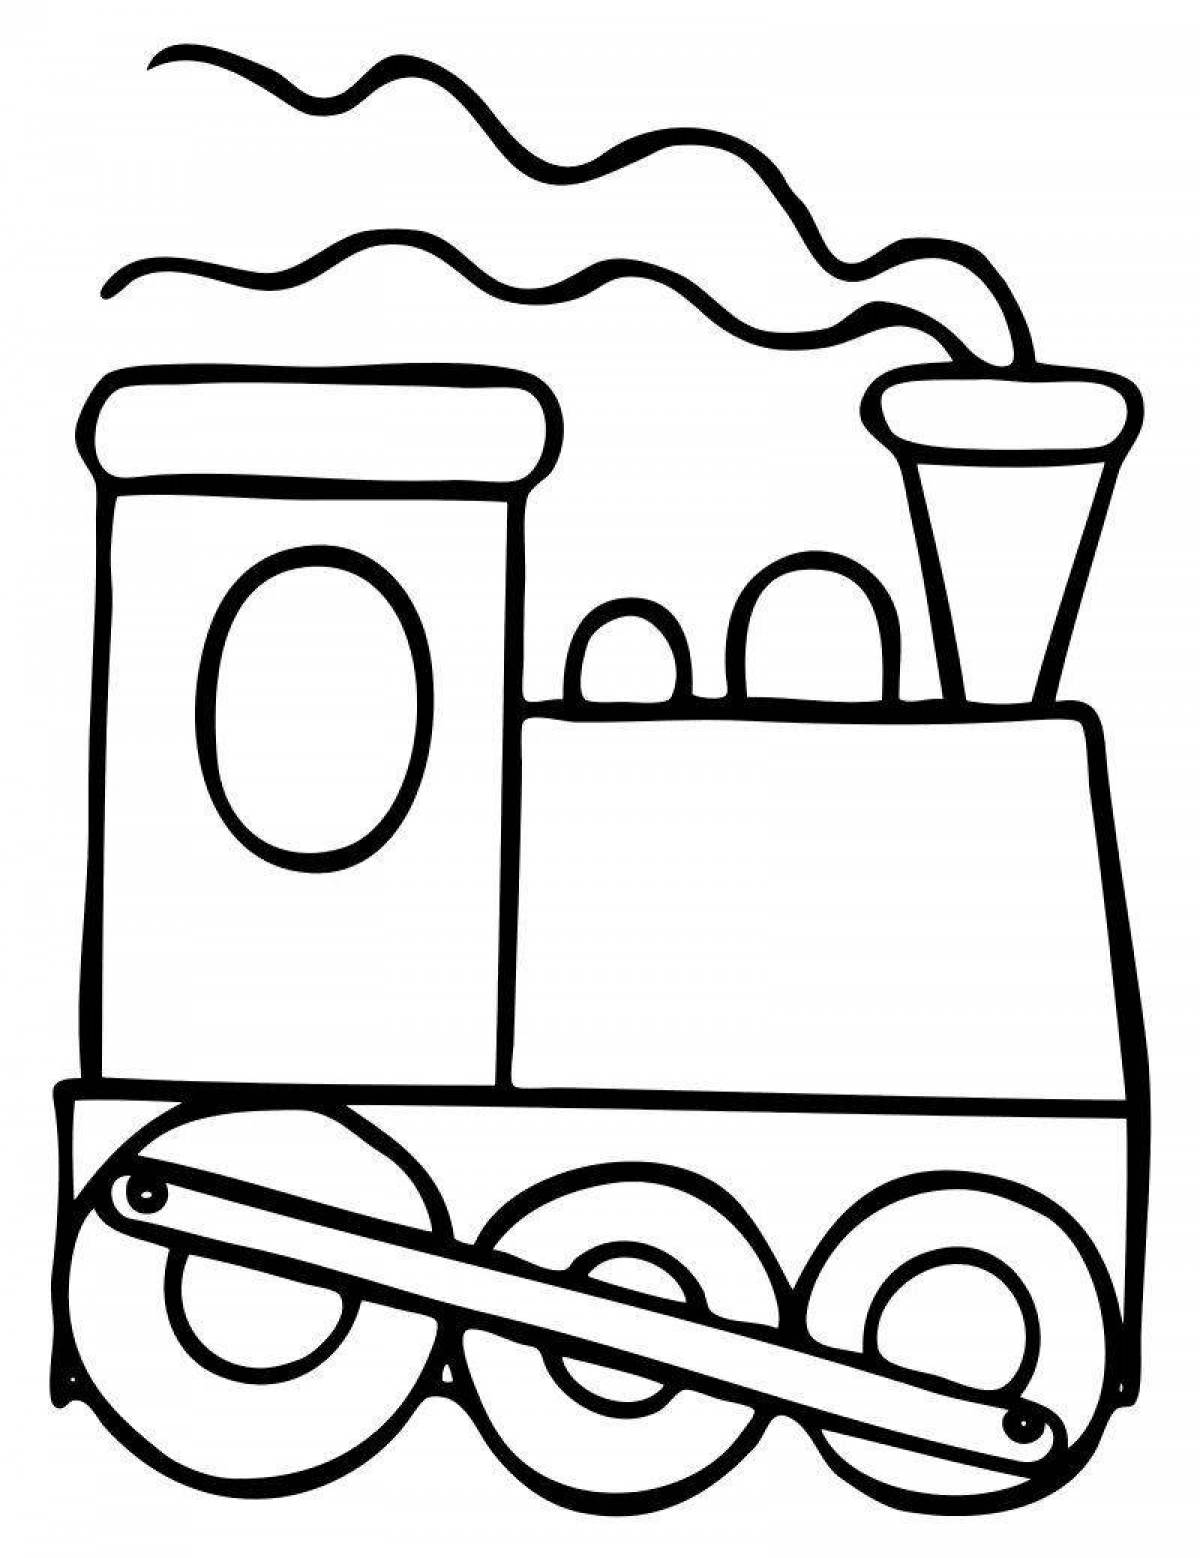 Outstanding steam locomotive coloring page for kids